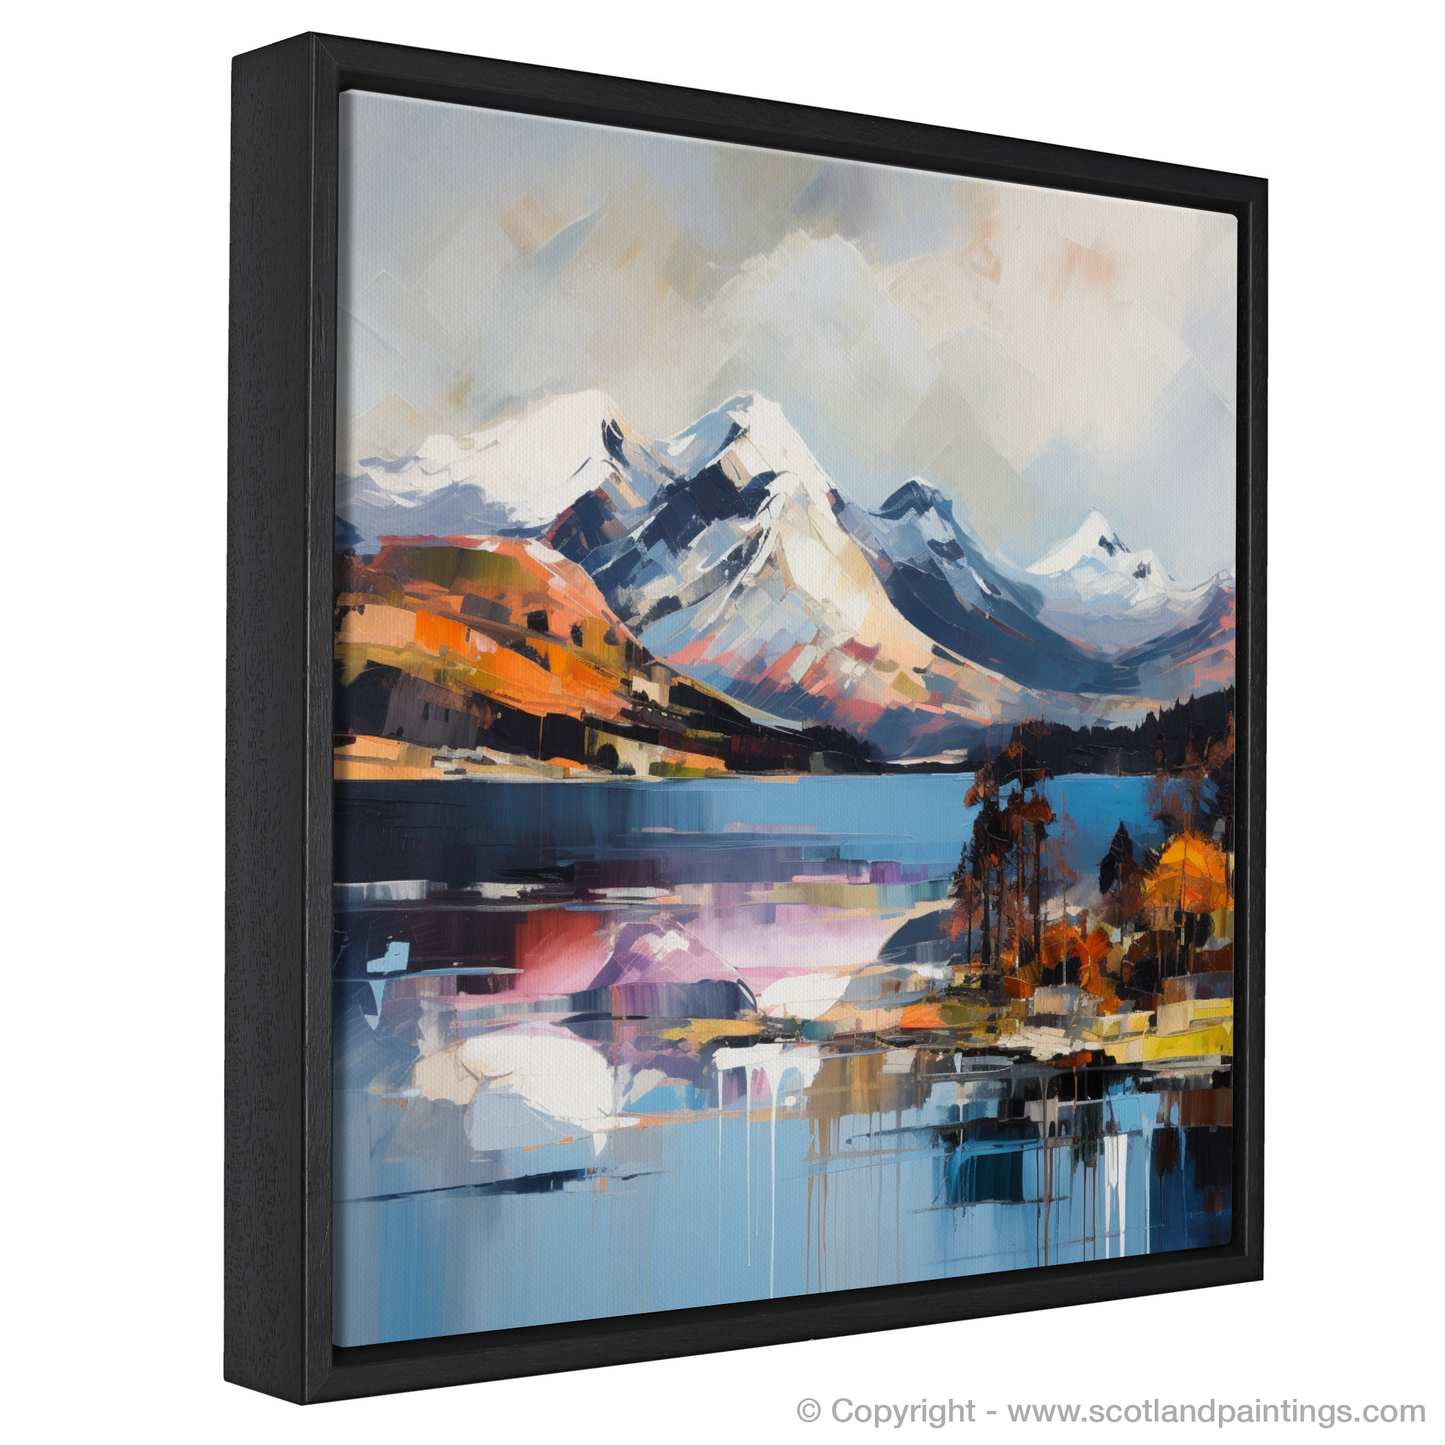 Painting and Art Print of Snow-capped peaks overlooking Loch Lomond entitled "Expressionist Majesty: Snow-capped Peaks Over Loch Lomond".